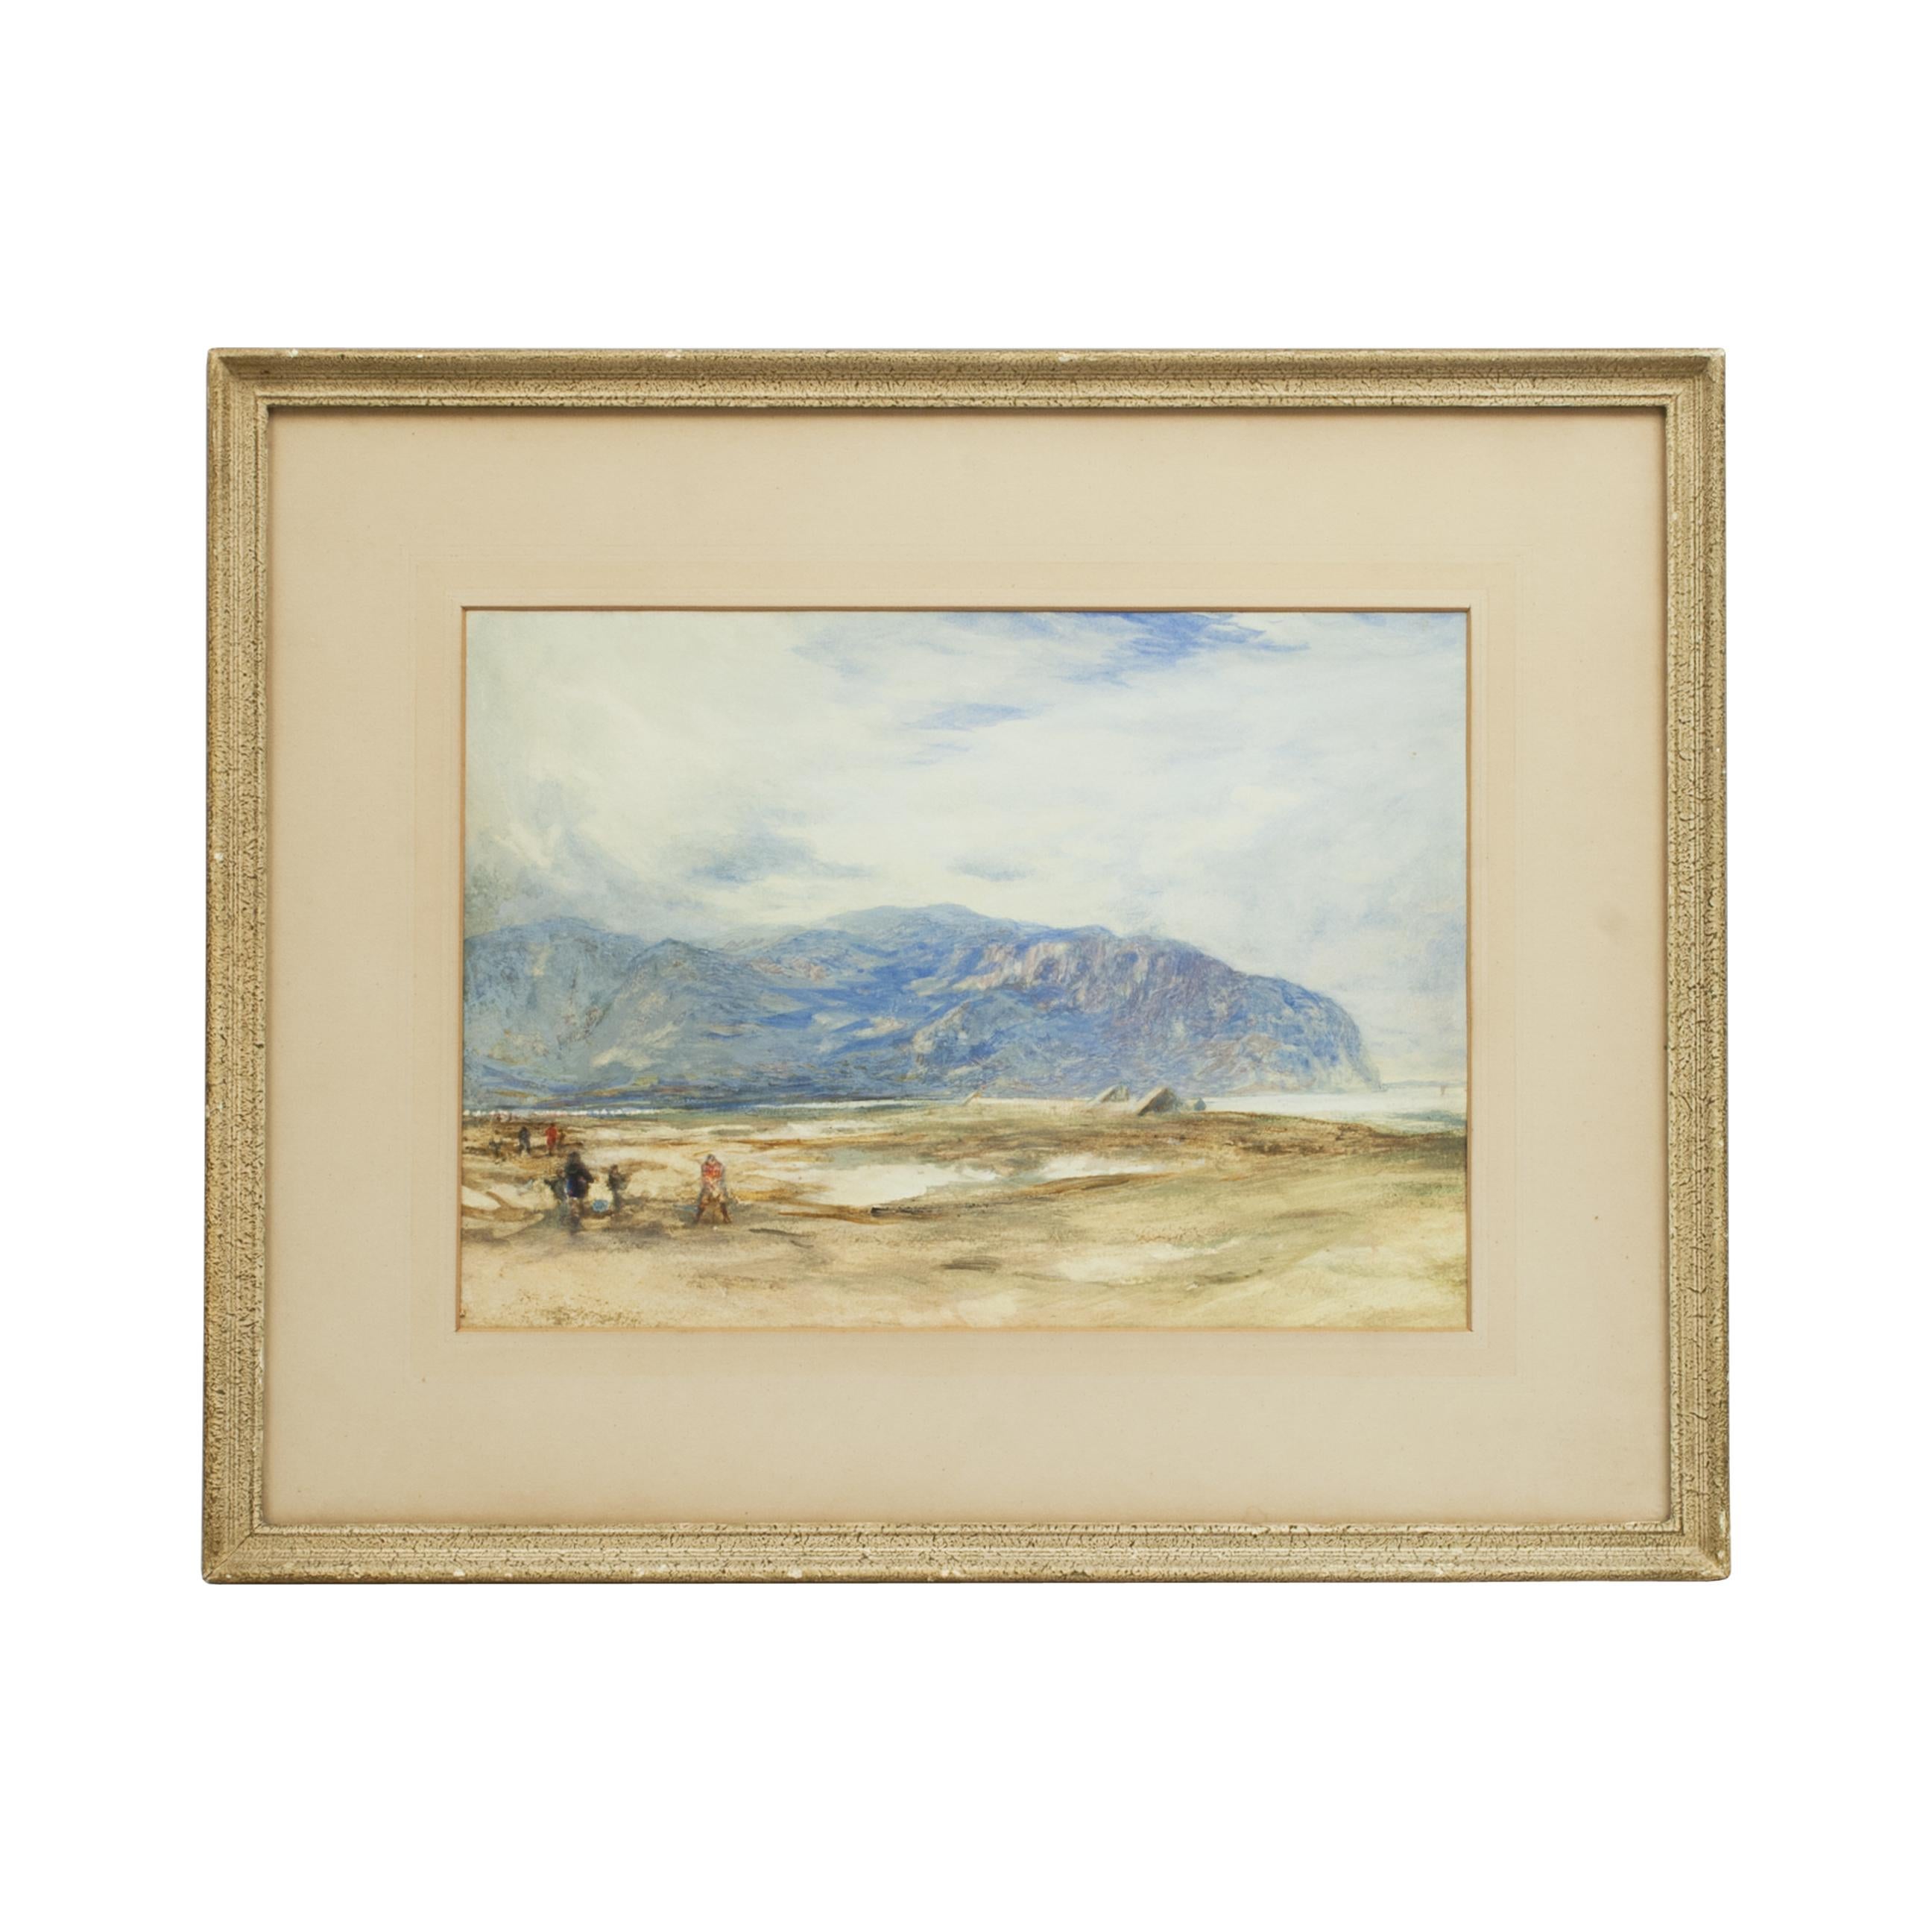 Antique Golf Painting in Watercolour of Caernarvonshire Golf Club, Wales